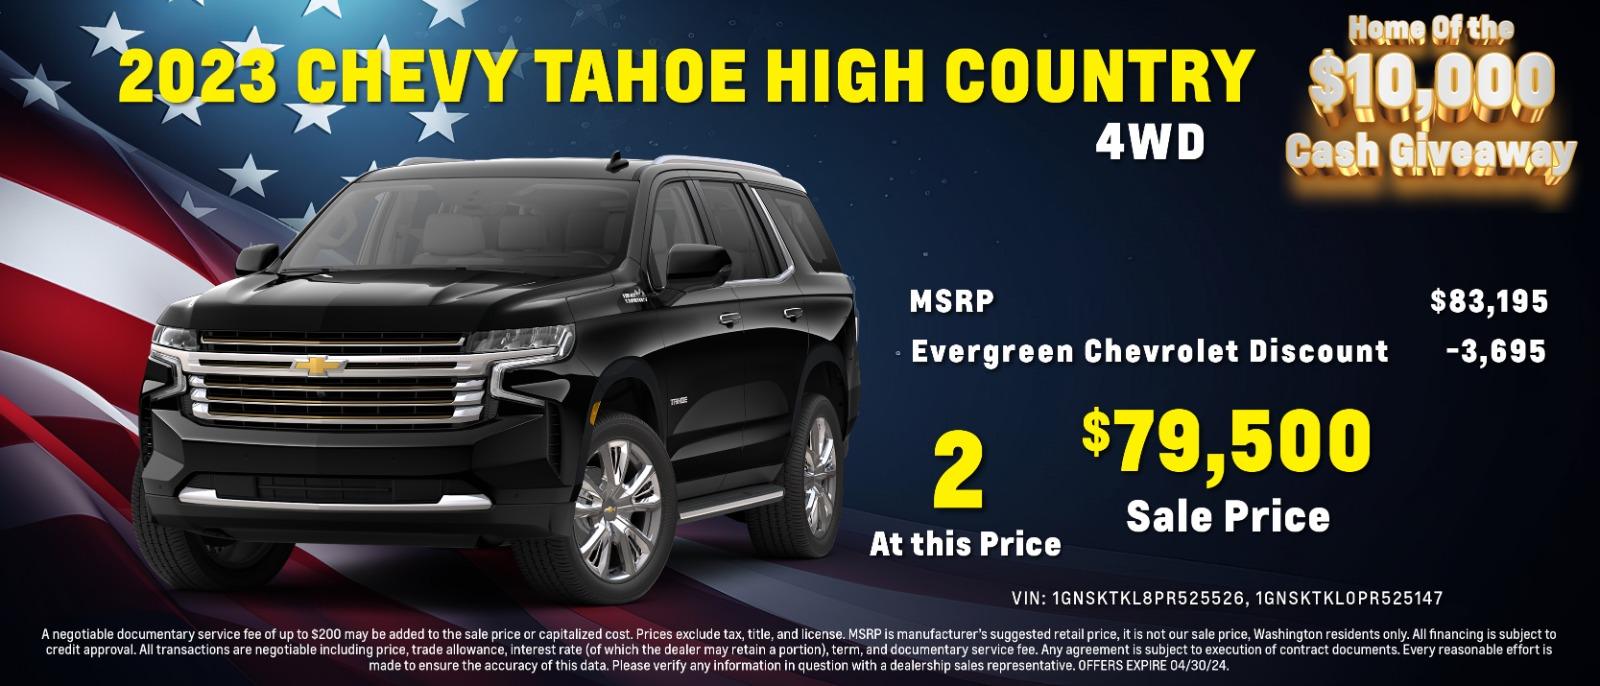 2023 Chevy Tahoe High Country 4WD